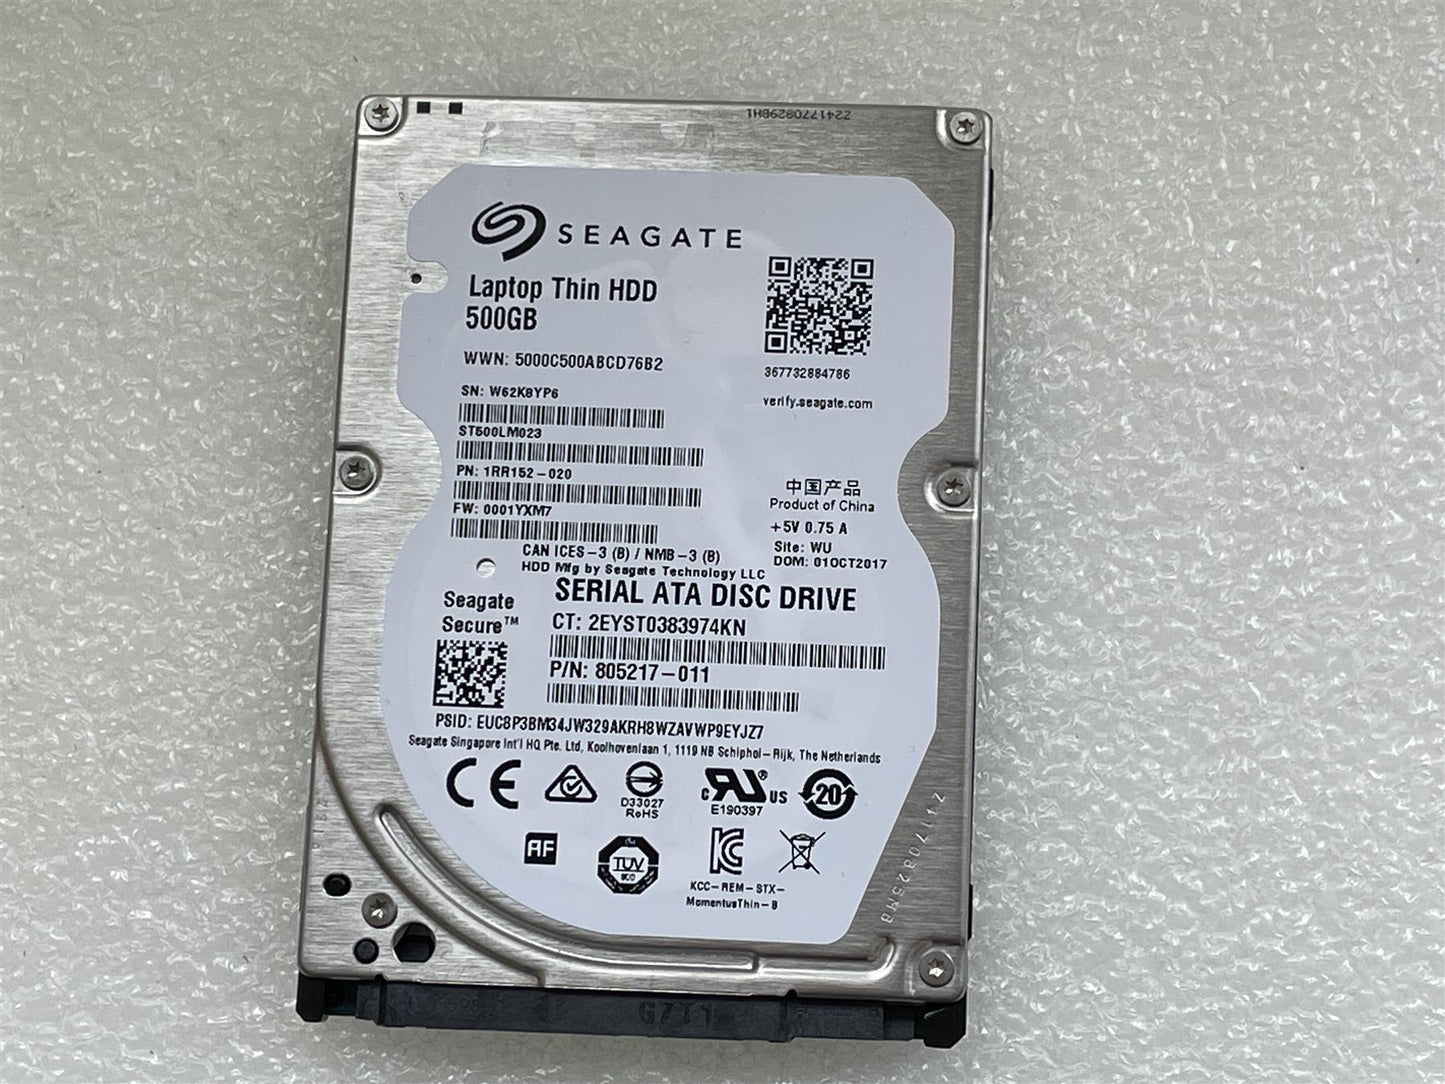 For HP 828642-001 Seagate ST500LM023 2.5 inch 500GB SATA HDD Hard Disk Drive NEW